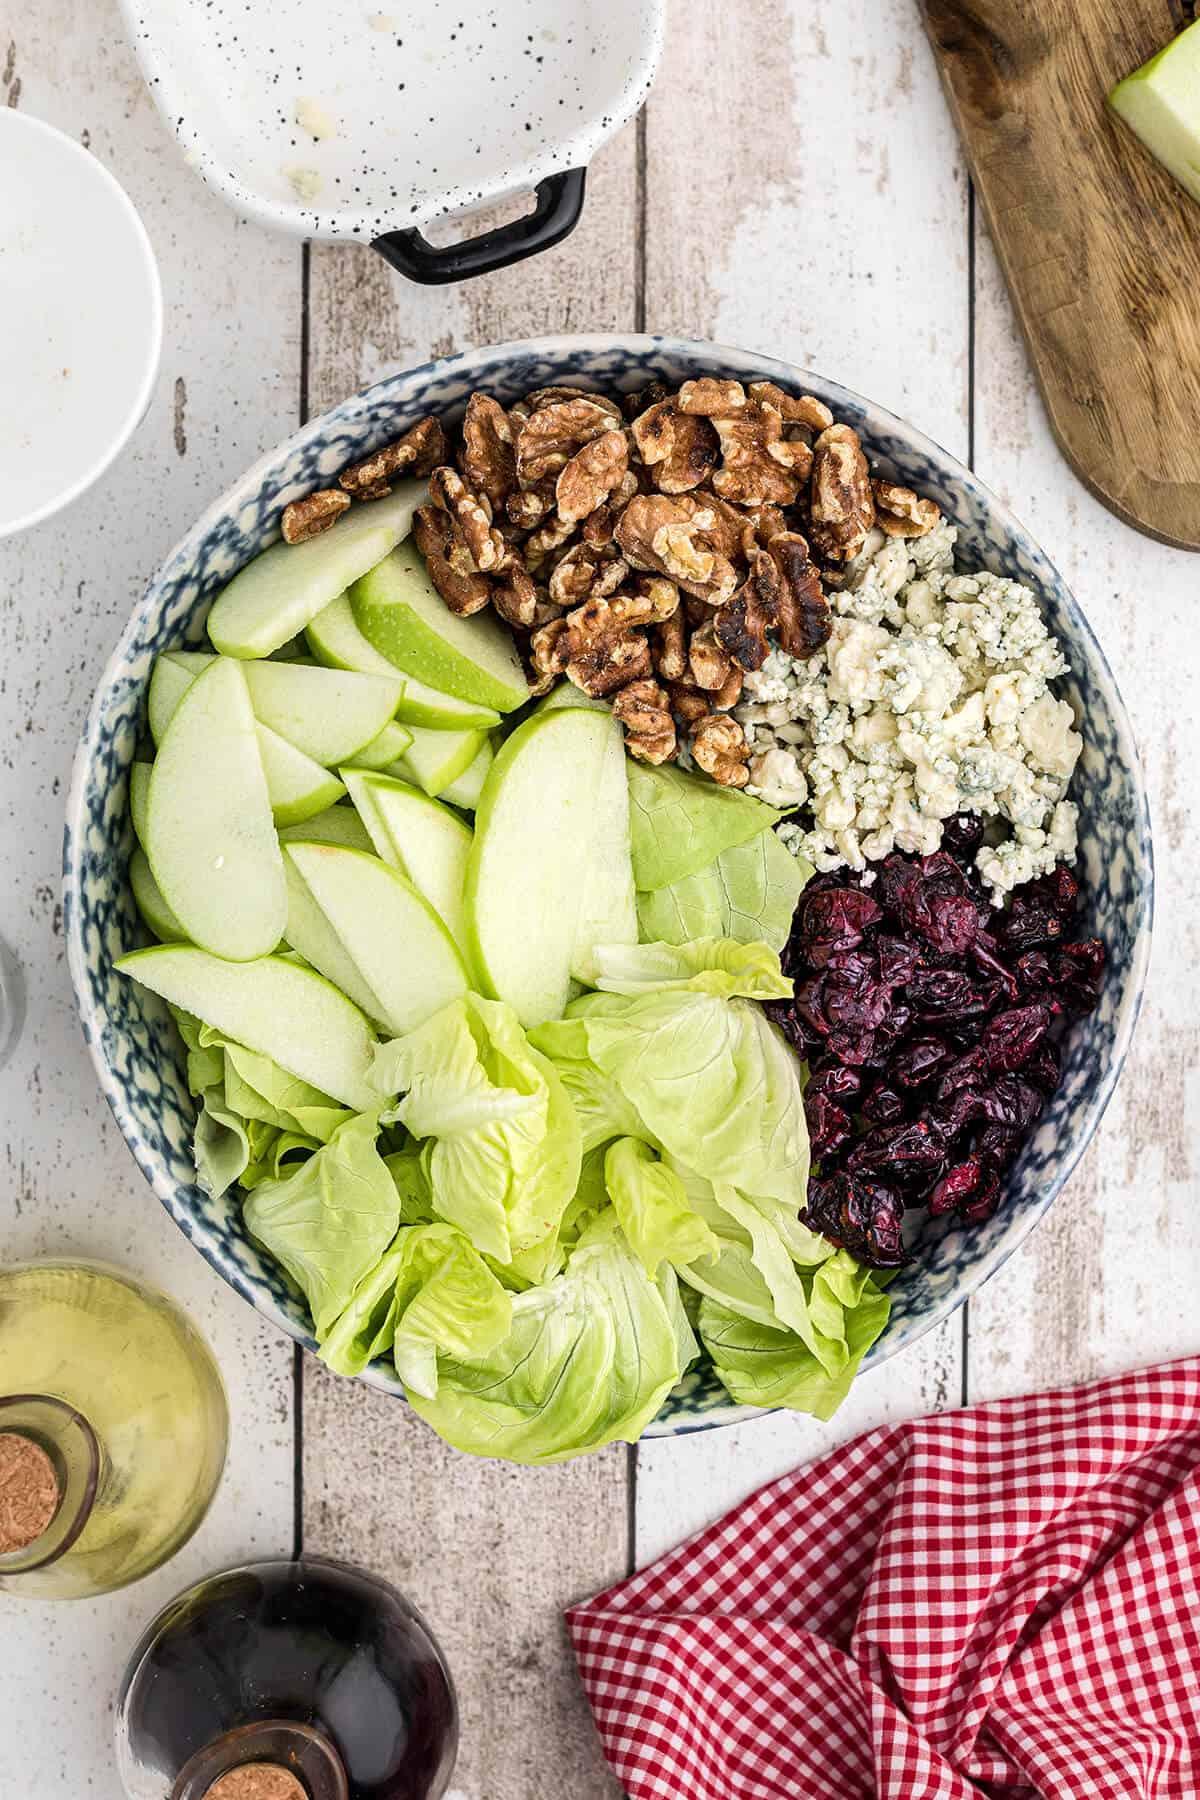 Apples, cranberries, lettuce, walnuts, and blue cheese in a bowl.